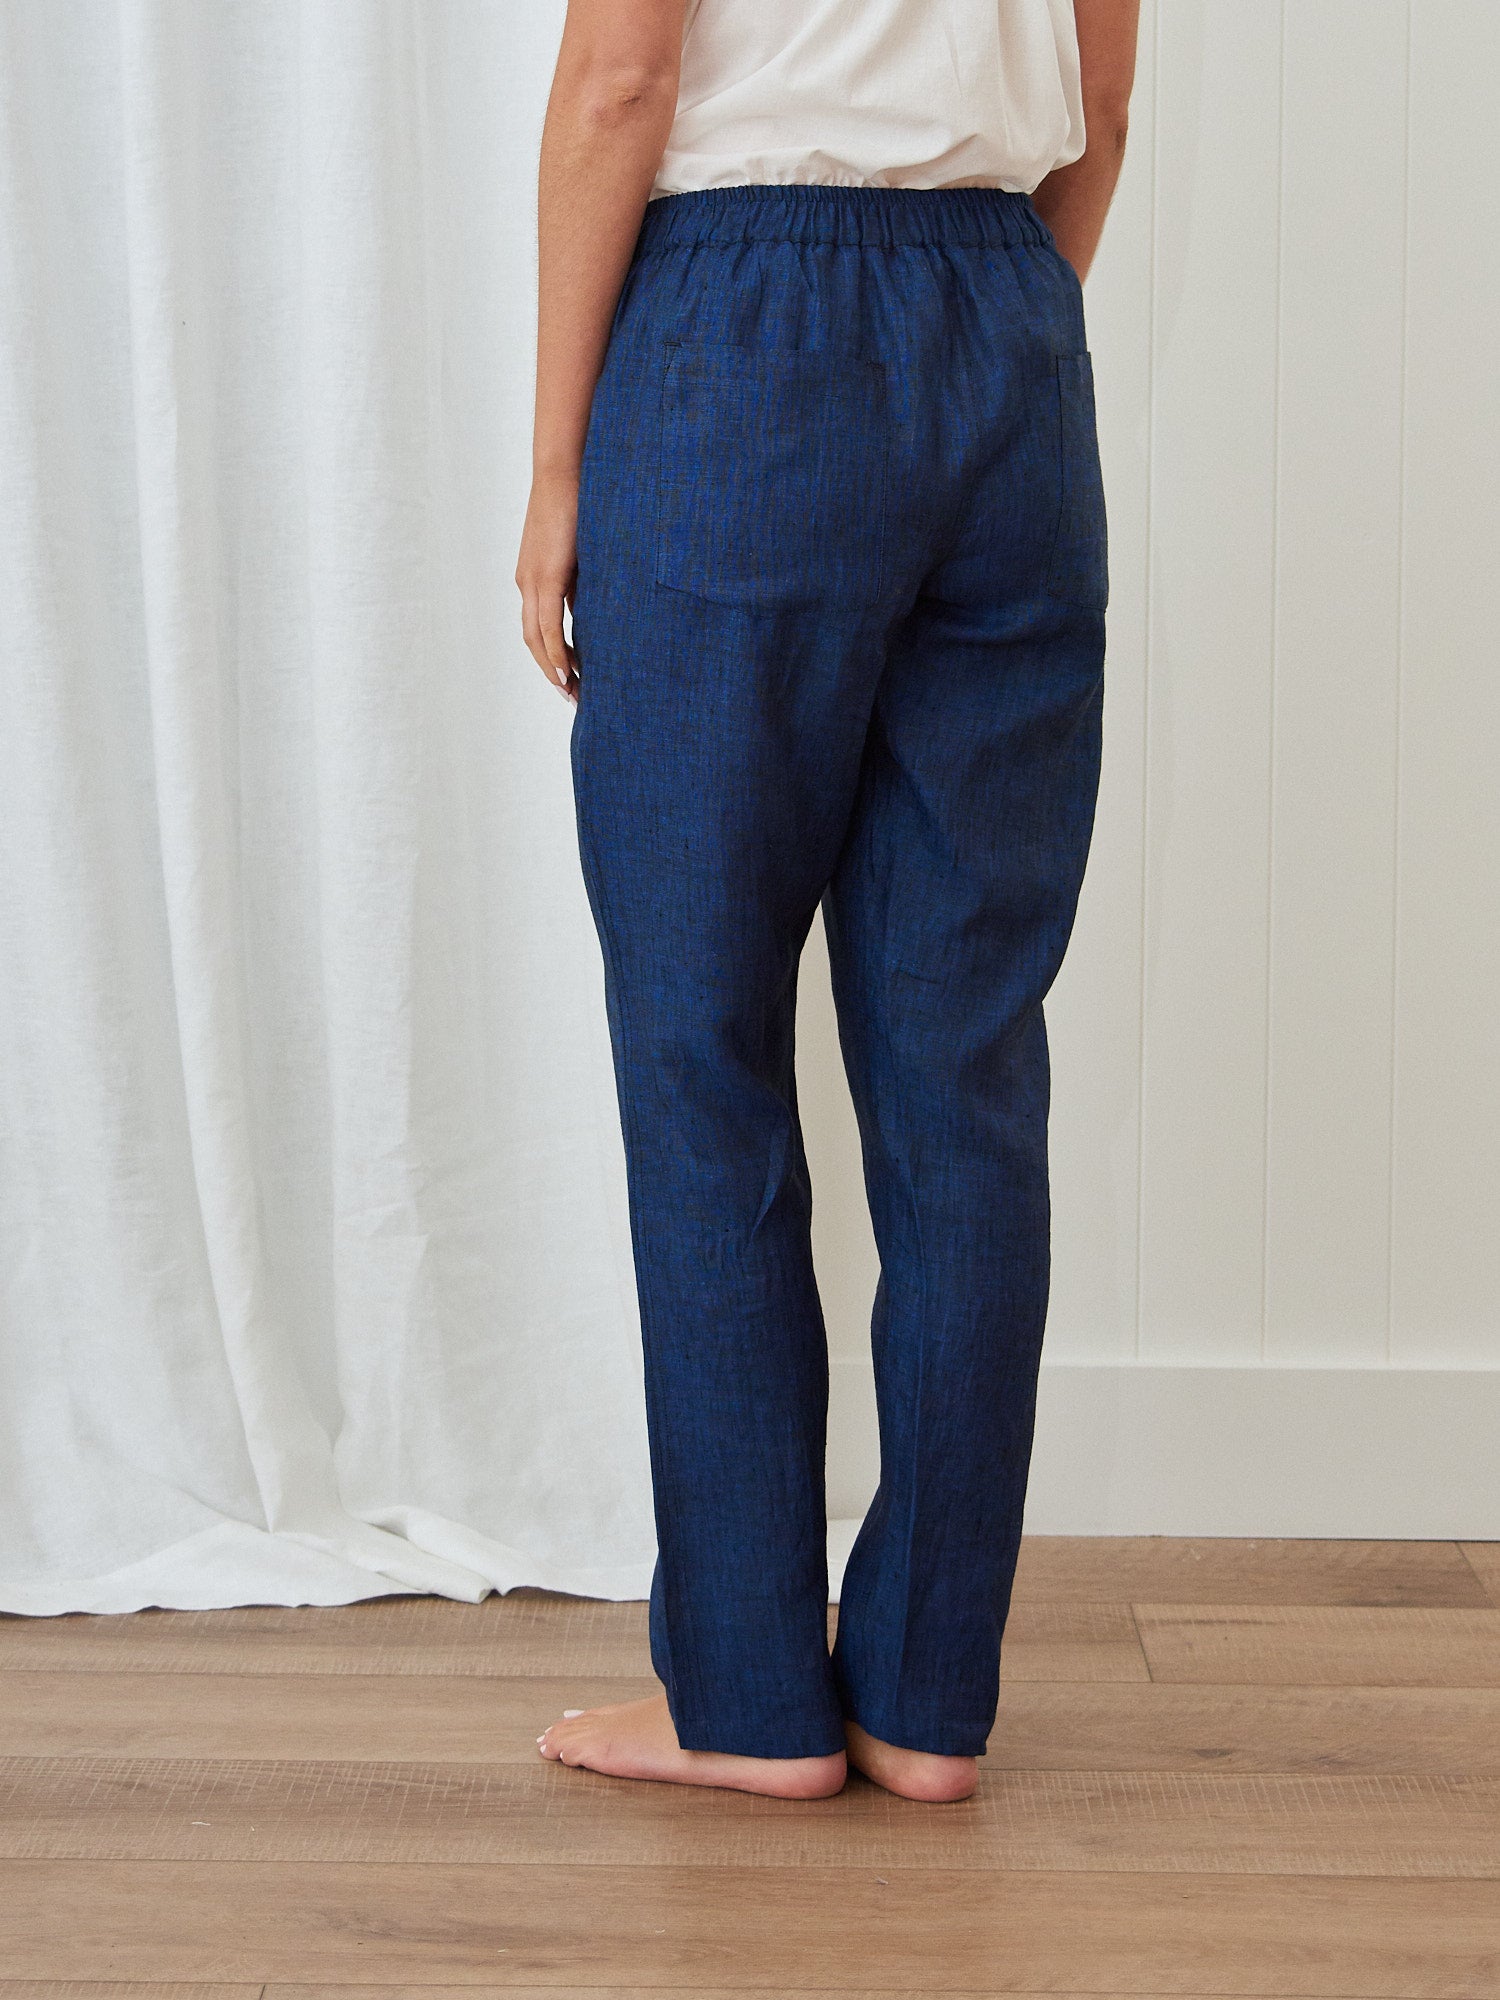 Voyager Linen Pants in Blue Chambray